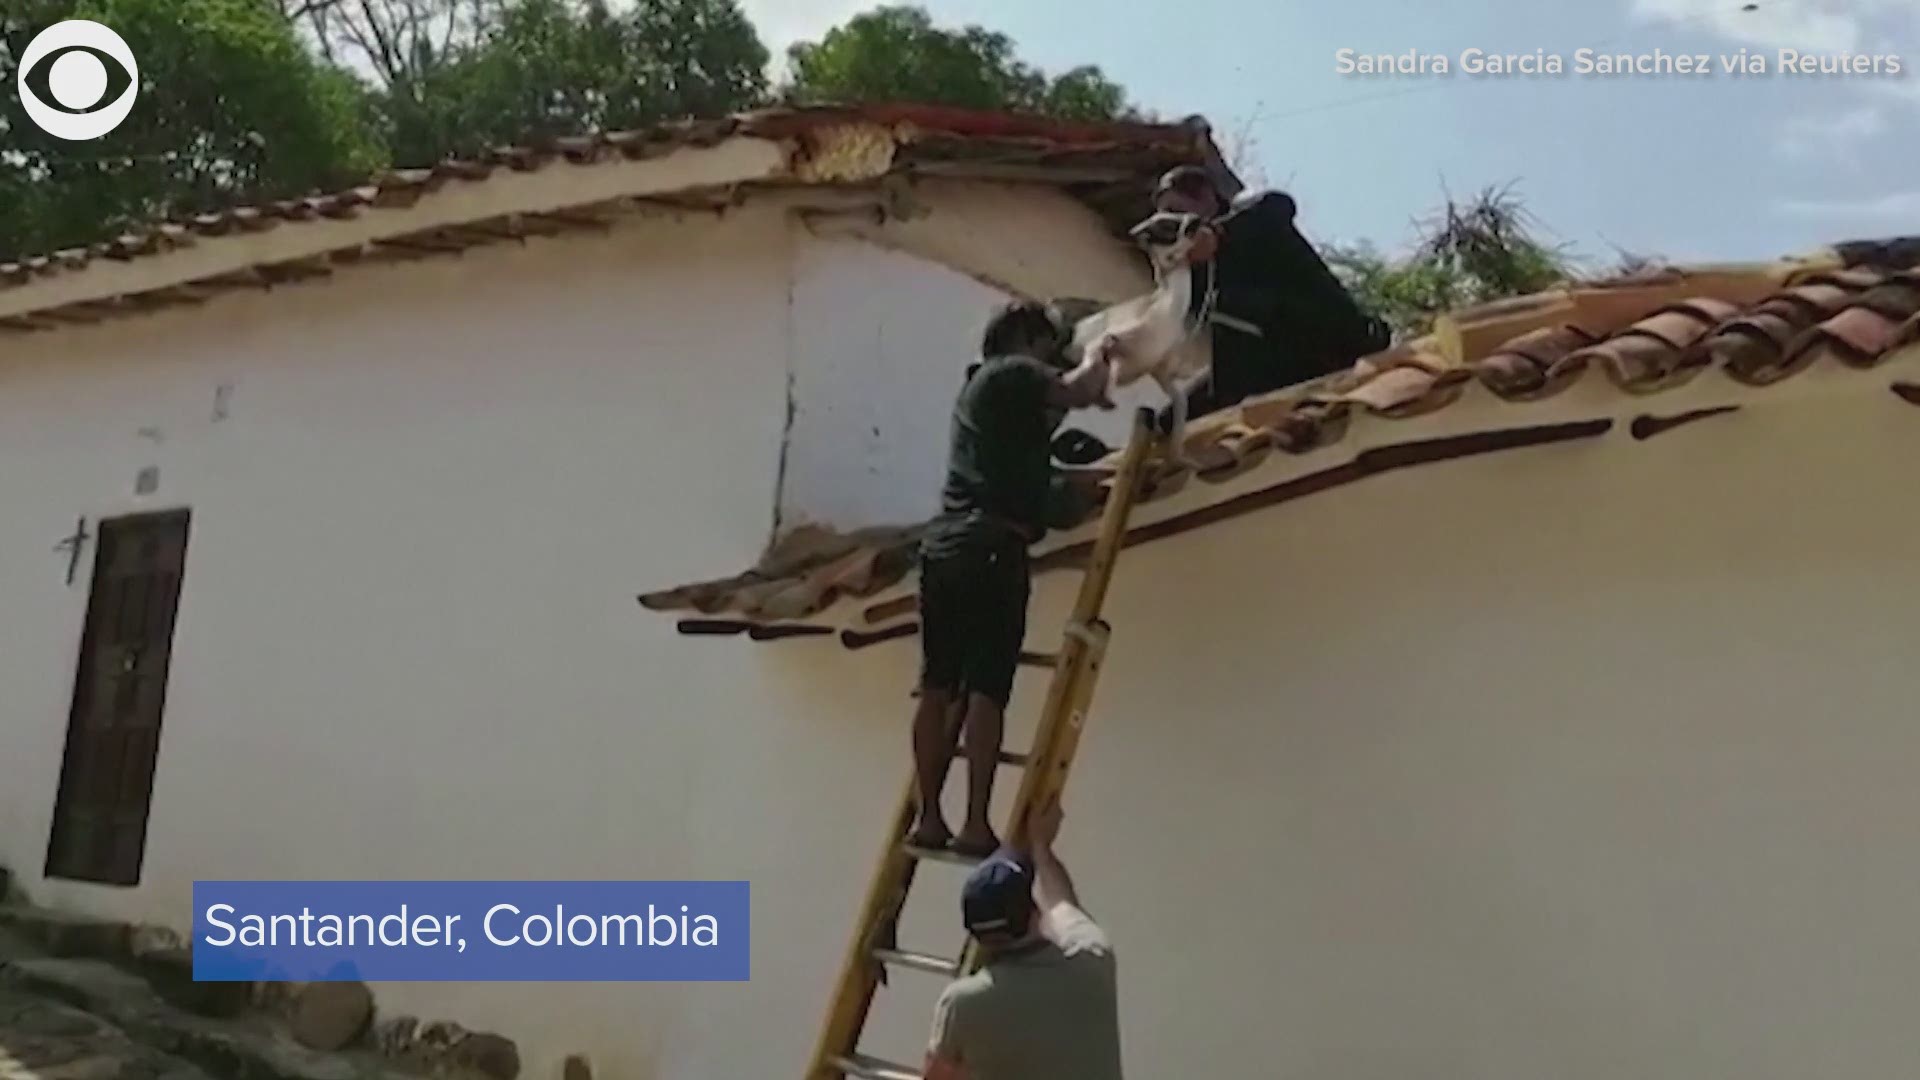 GOATS ON A ROOF: Firefighters had to rescue a group of goats that were trapped on a roof in the northern Columbian department of Santander on Sunday (3/14).